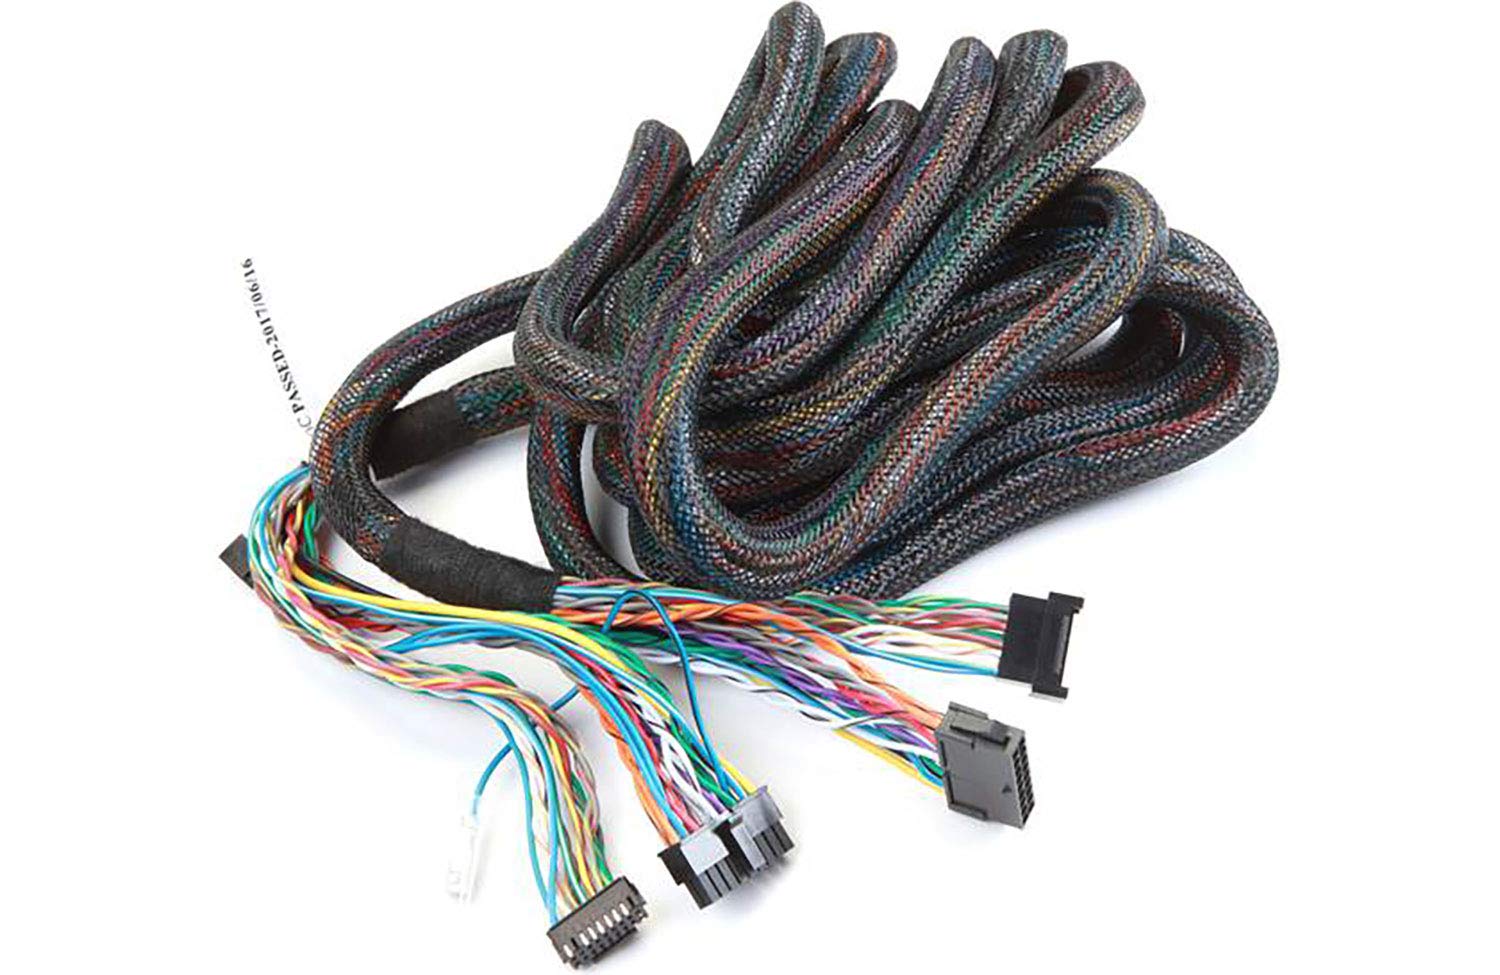 iDatalink HRN-AR-EXT4 Harness 4-meter extension harness for relocating your Rockford Fosgate DSR1 processor or iDatalink-ready amp in a Maestro AR installation